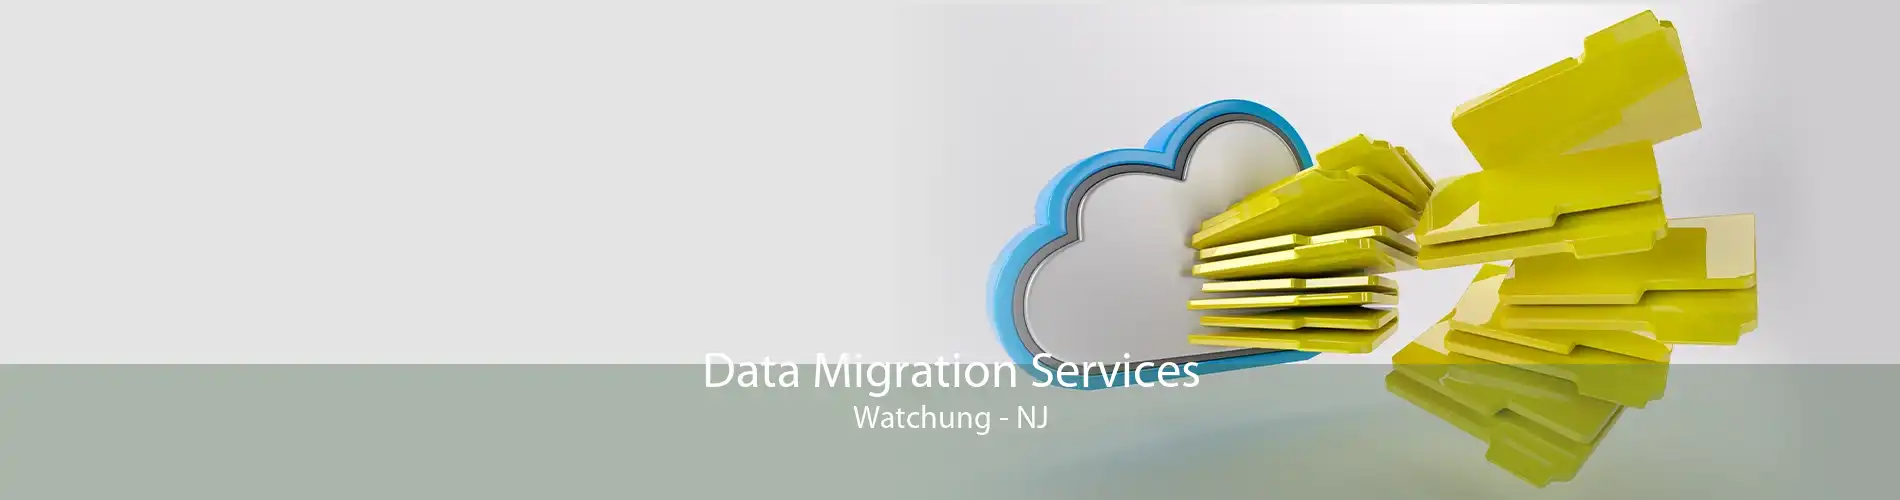 Data Migration Services Watchung - NJ